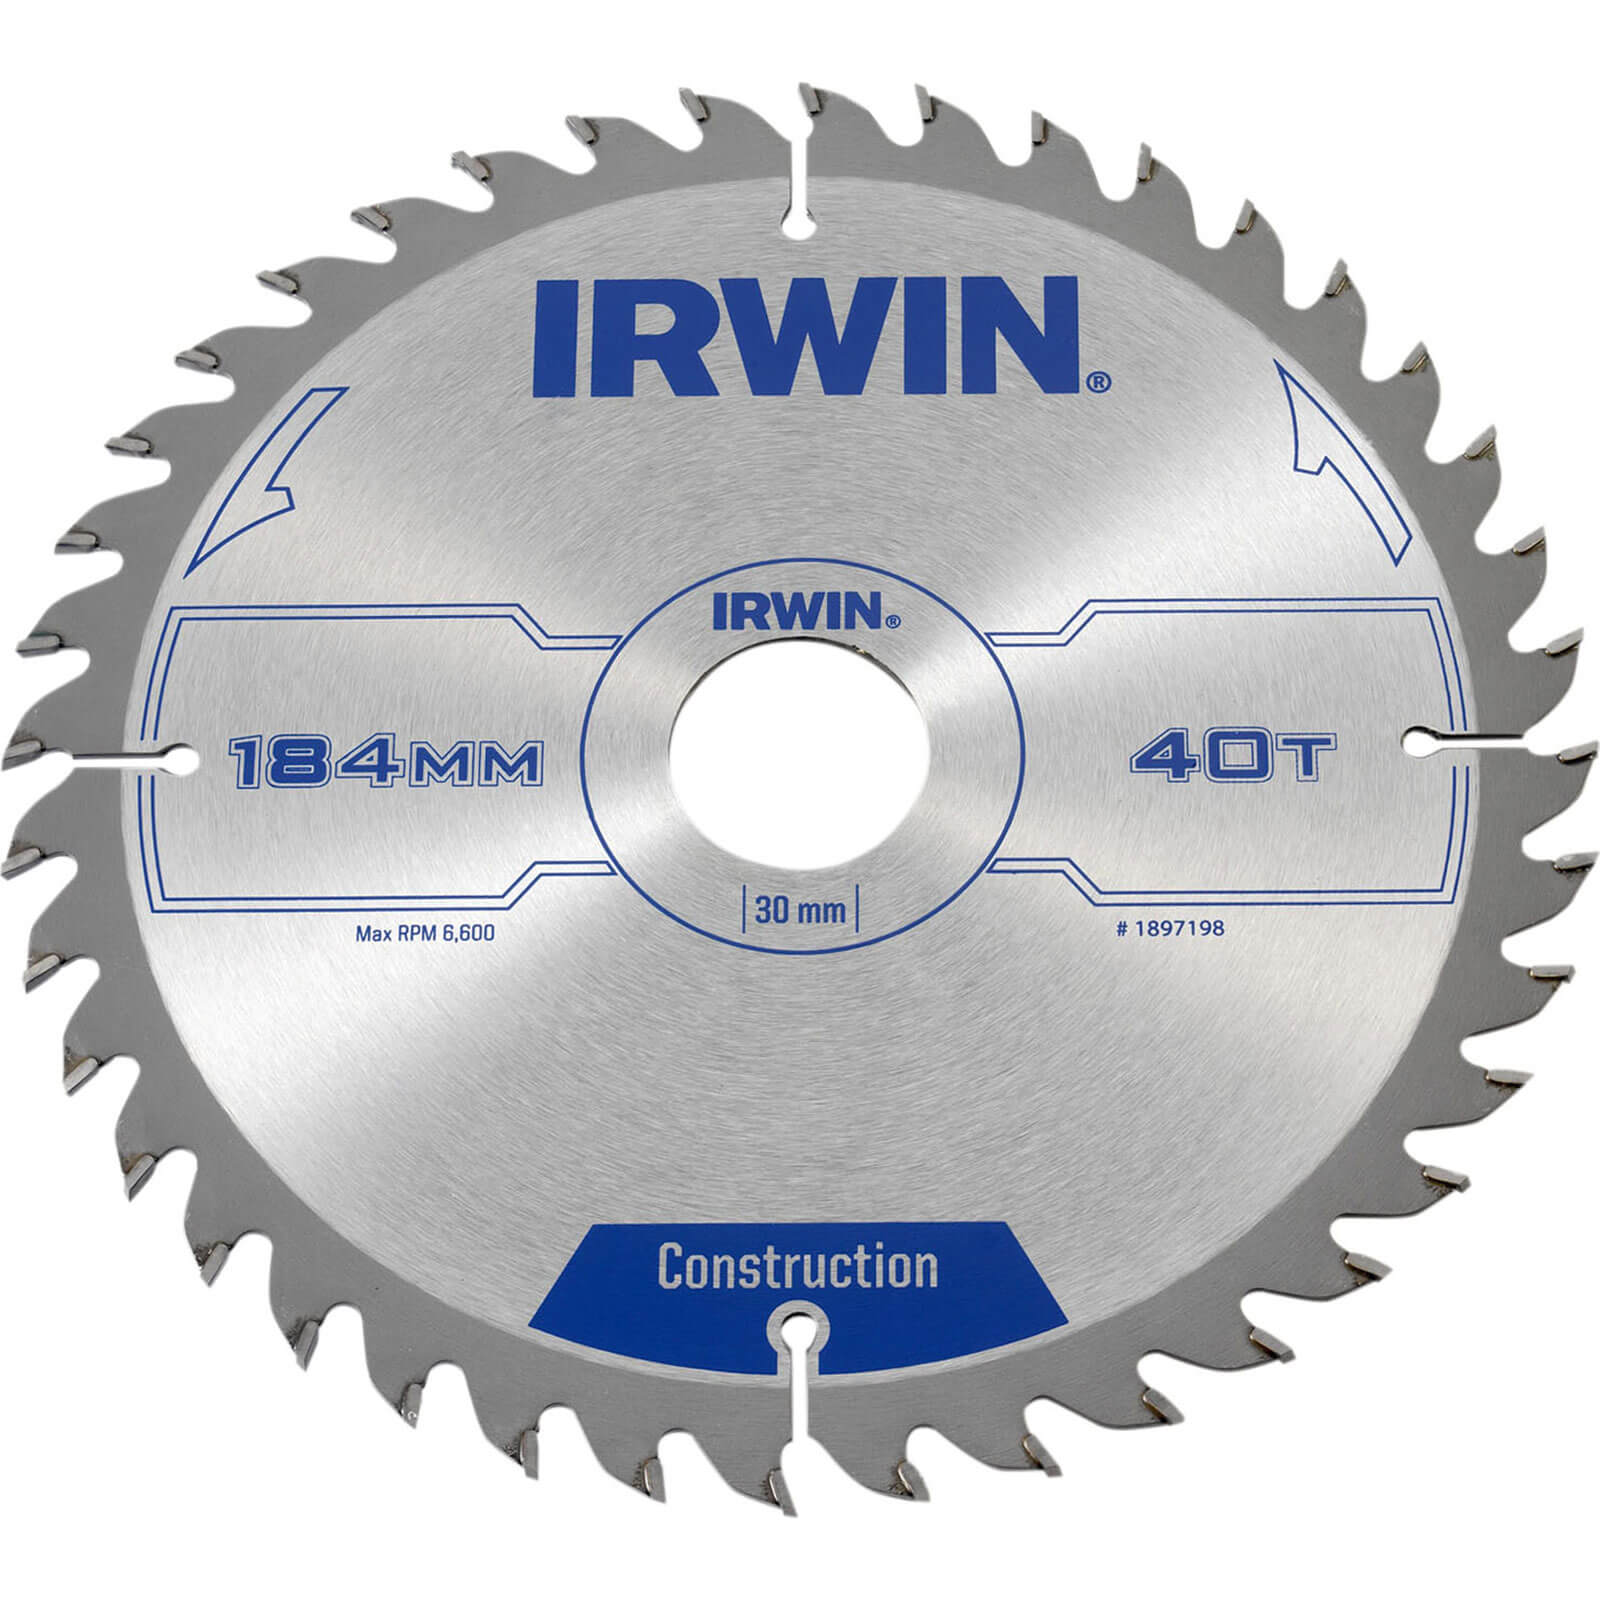 Image of Irwin ATB Construction Circular Saw Blade 184mm 40T 30mm